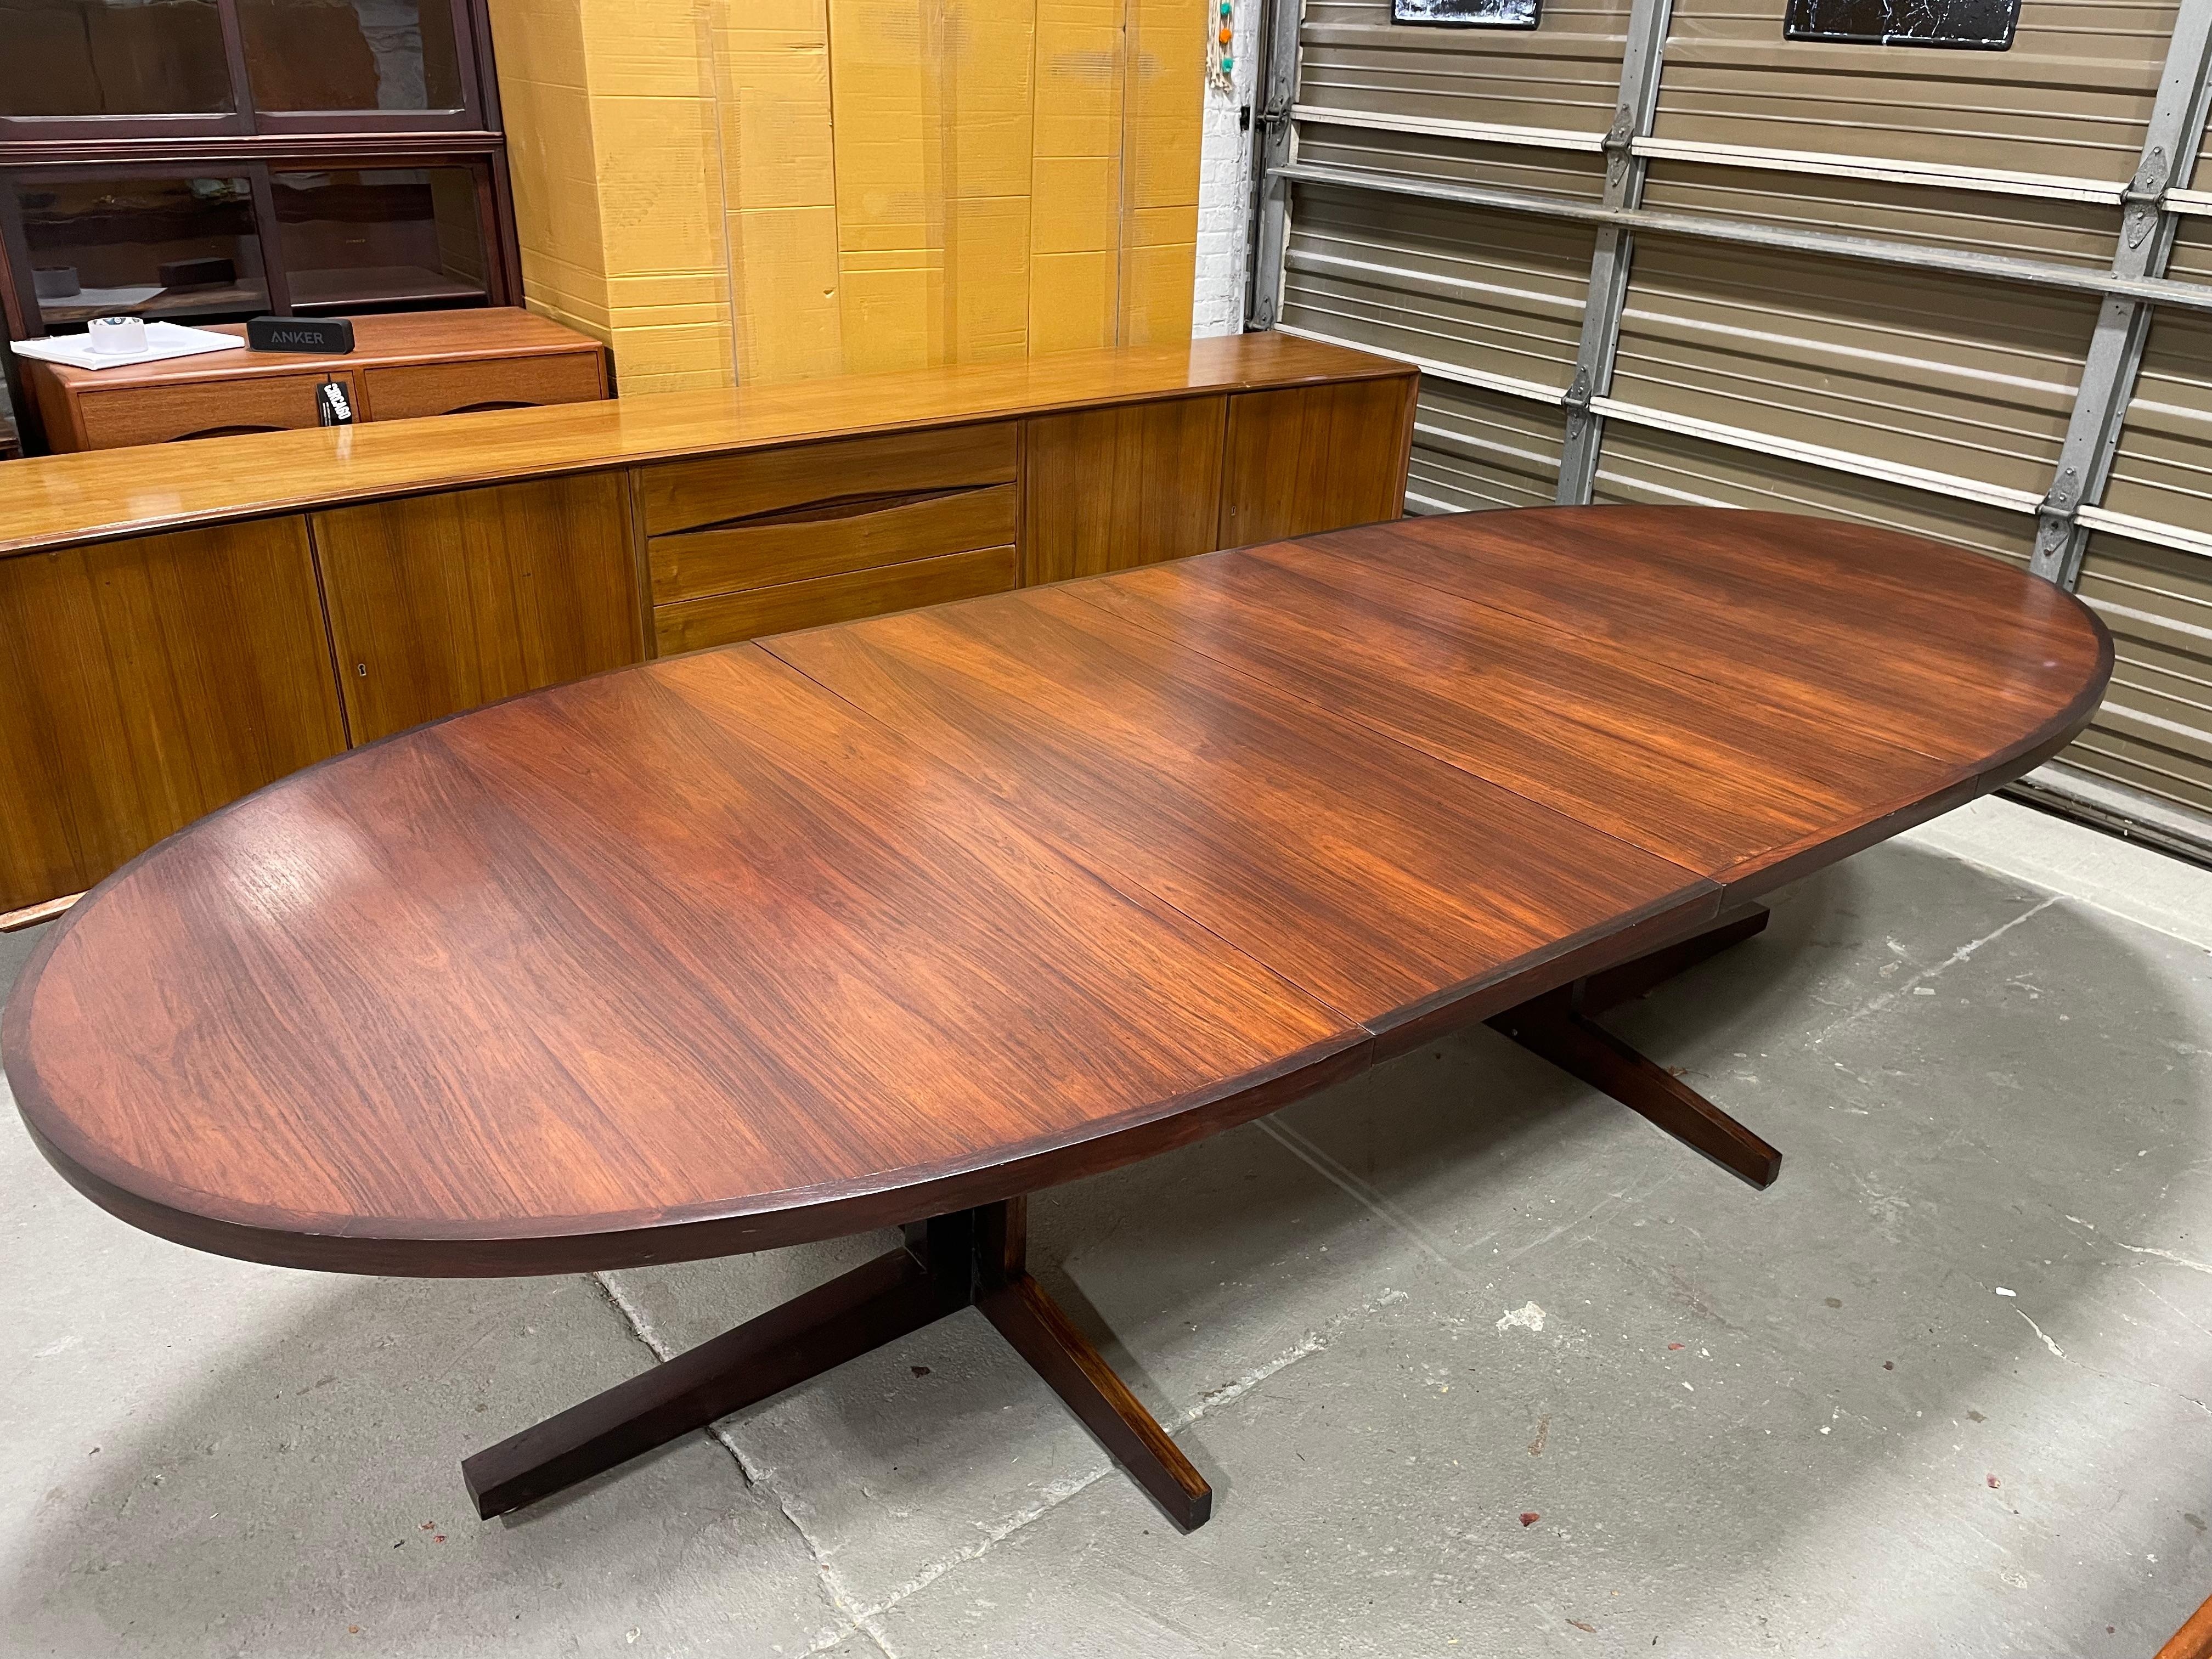 Extra Long Mid Century Modern Rosewood Oval Dining Table designed by John Mortensen for Heltborg Mobler, c. 1960’s.  The table has stunning wood grains across the tabletop and the pedestal legs are like none other, allowing for chairs to easily tuck